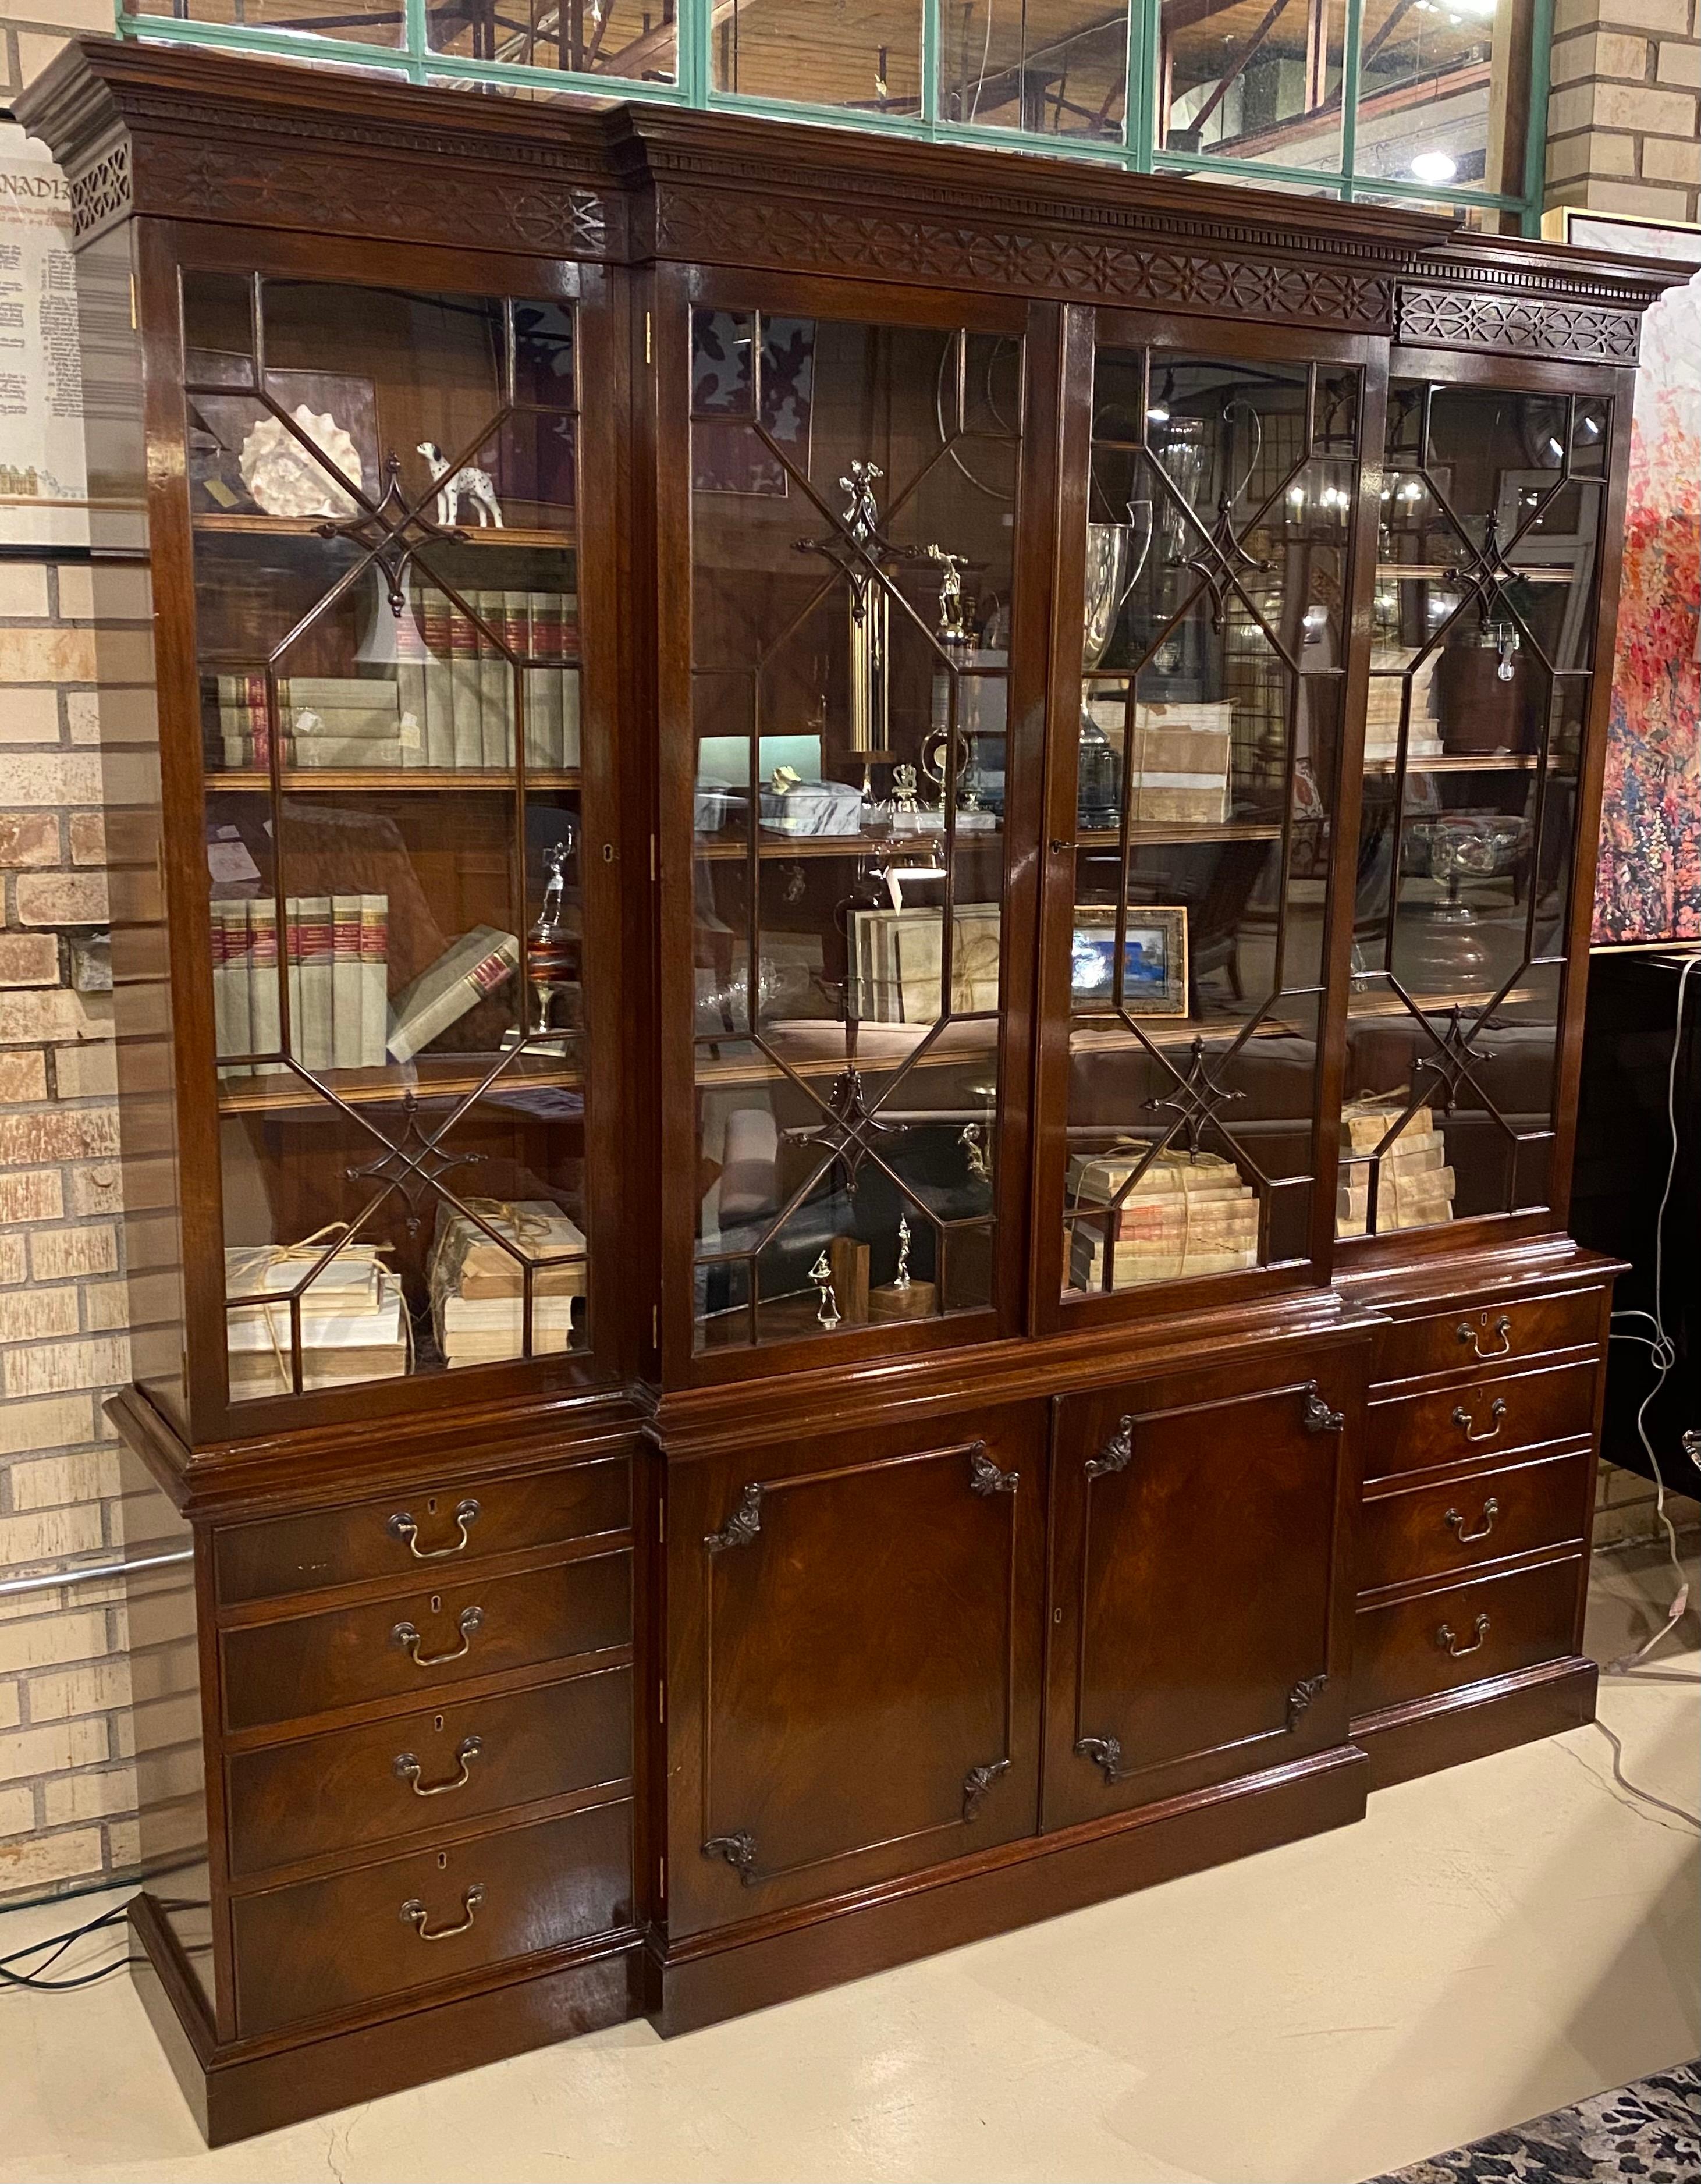 A traditional Georgian style English breakfront bookcase in mahogany. Classic 18th century detail and styling. Individual hand glazed upper doors with carved details add to the impressive nature of this cabinet. The broken arch swans neck pediment